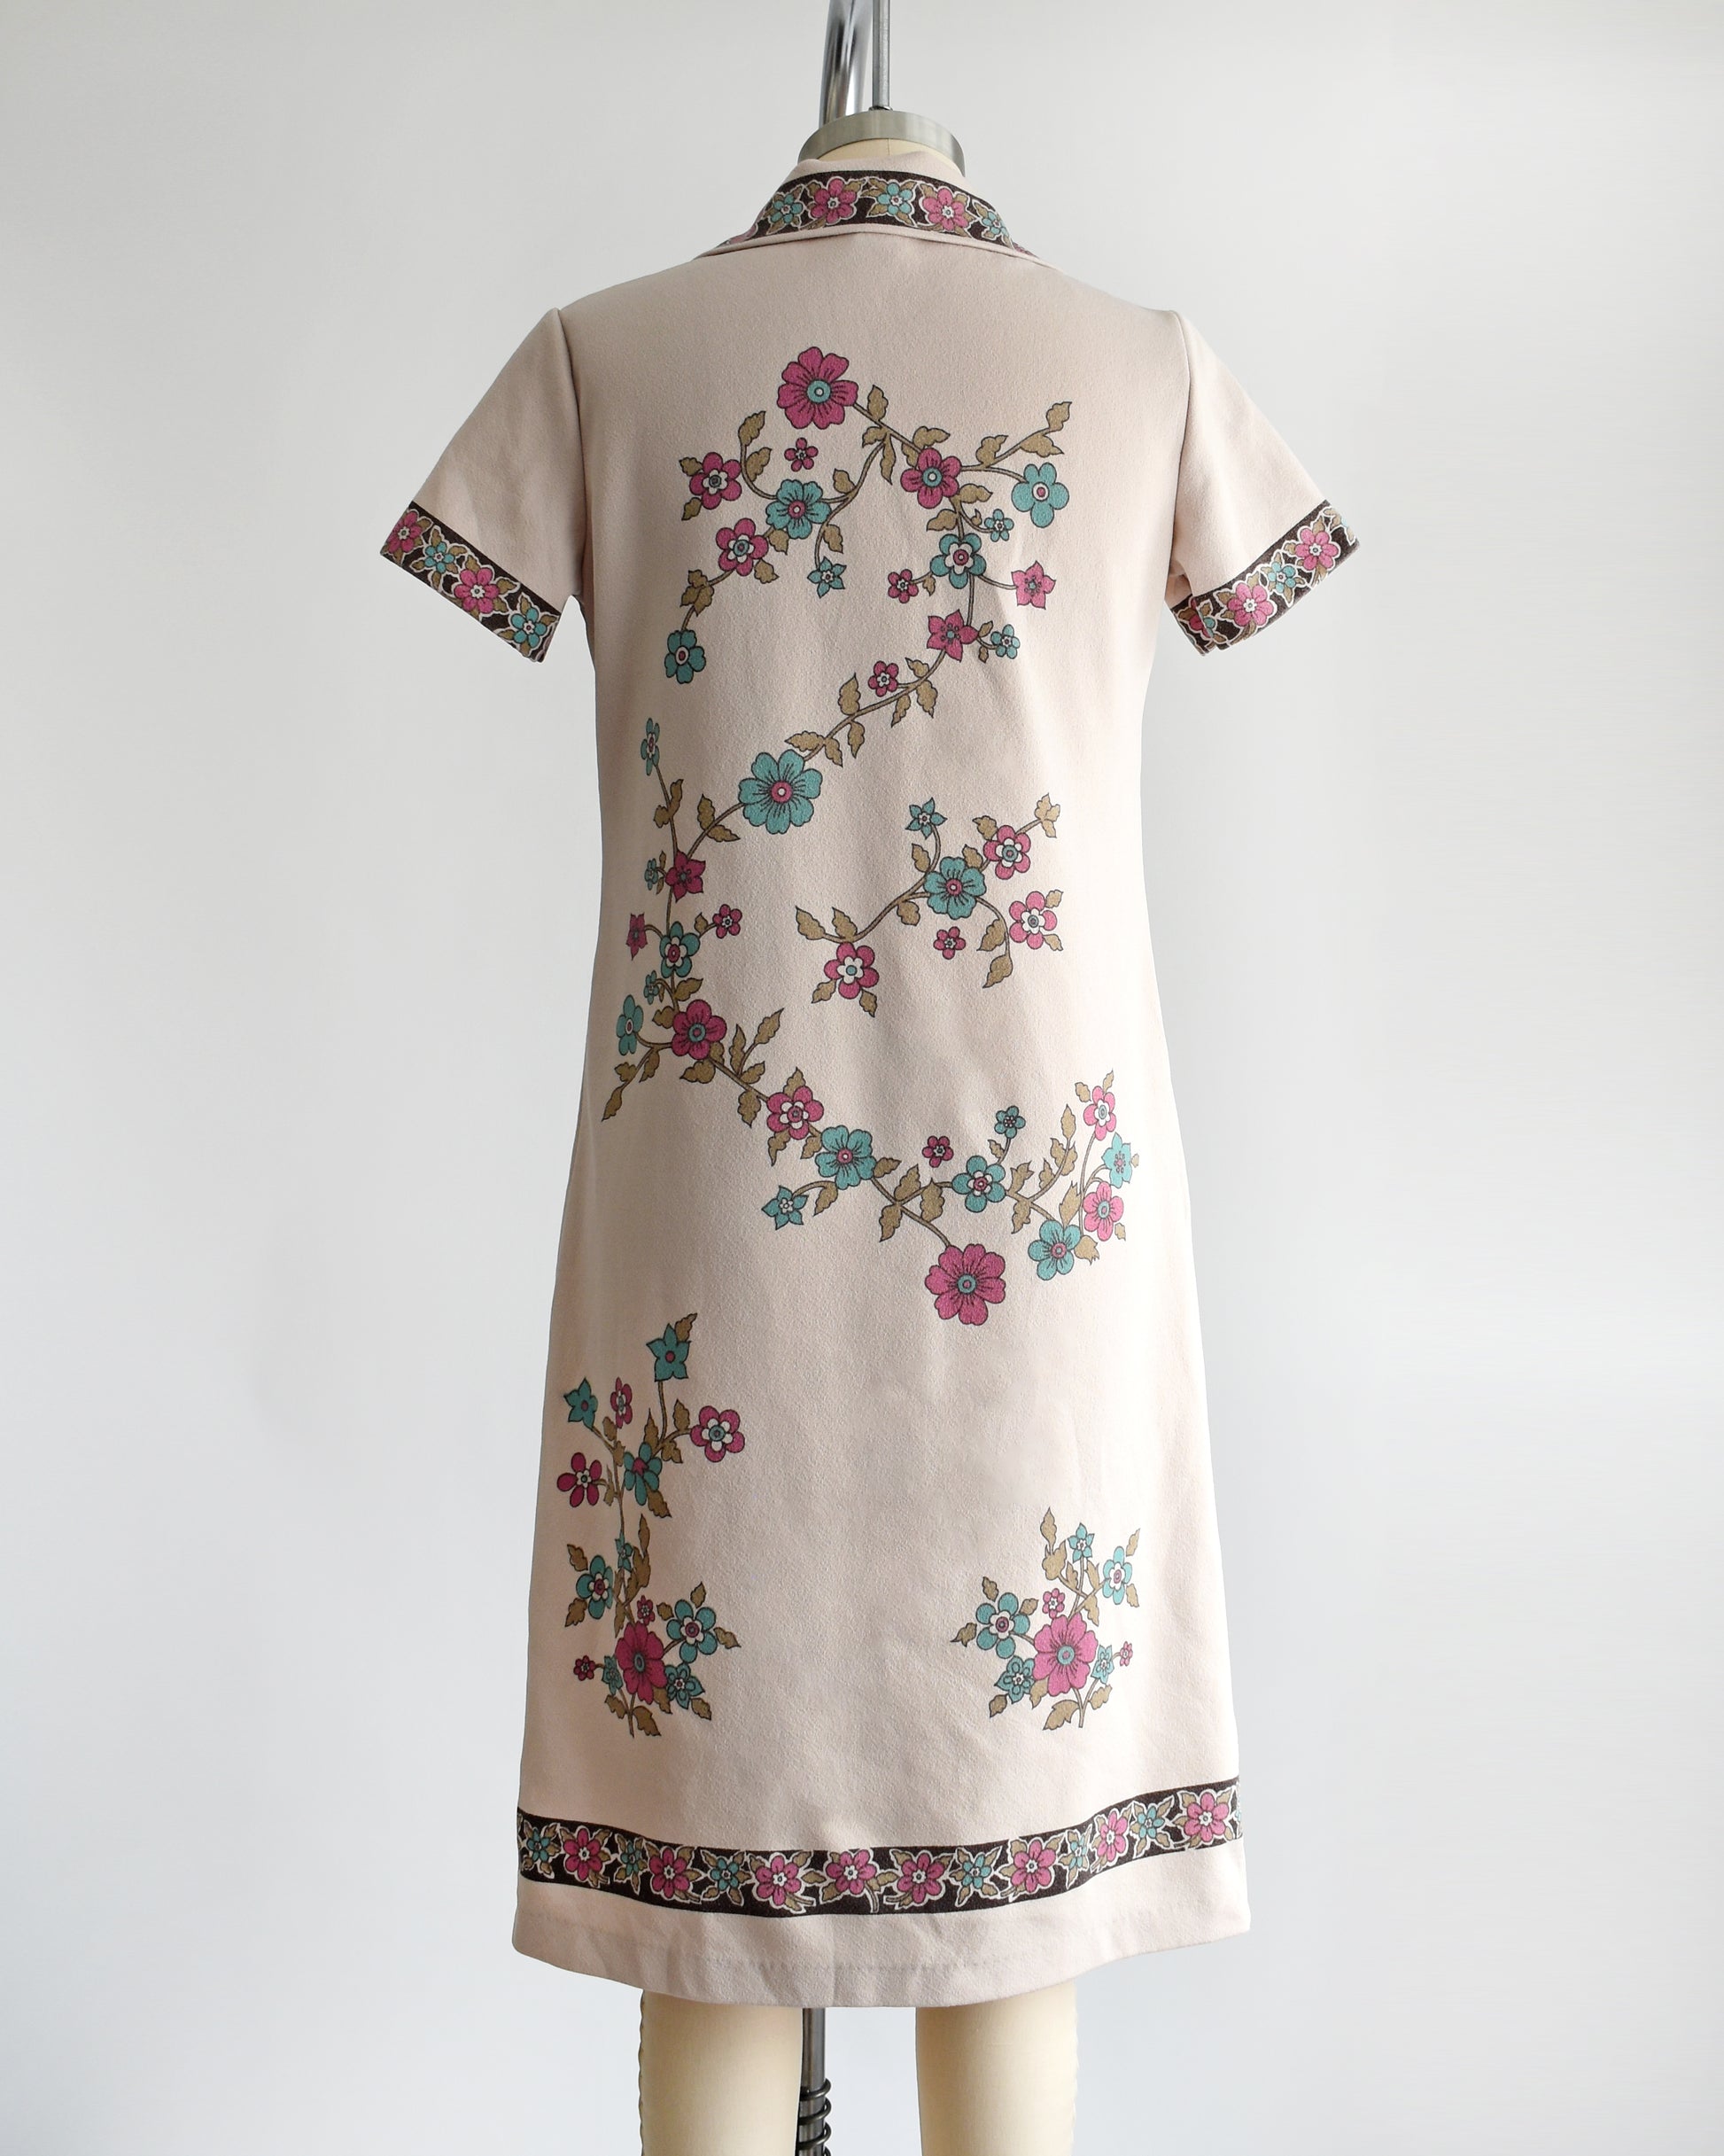 Back view of a vintage 1970s light brown mod dress with button front that features a blue and pink floral print 